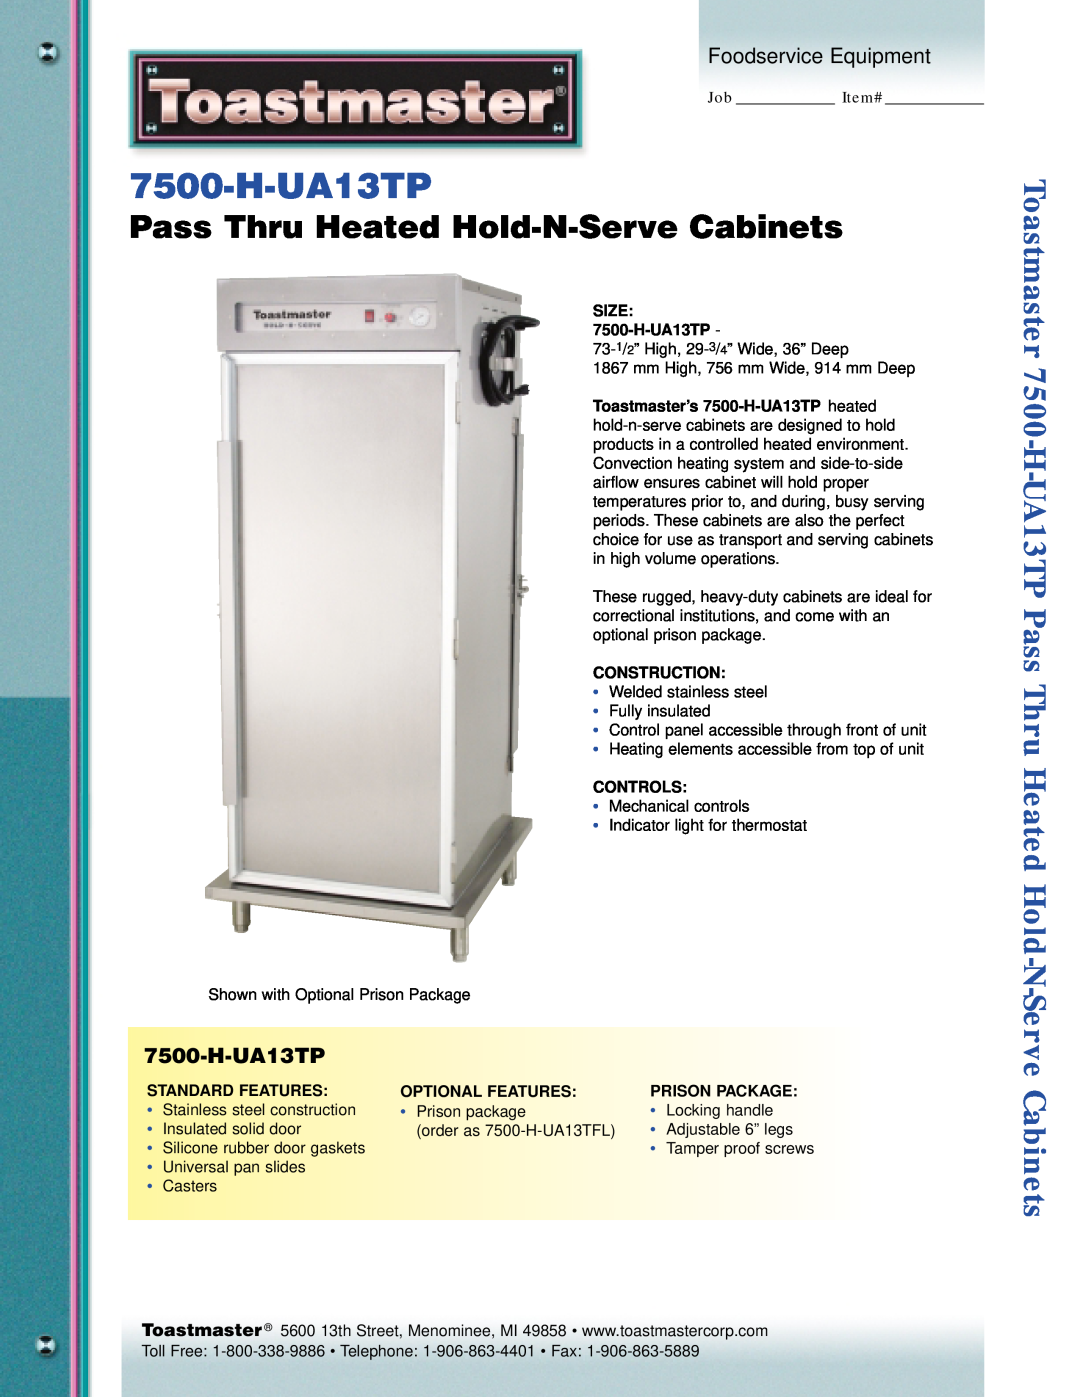 Toastmaster 7500-H-UA13TP manual Pass Thru Heated Hold-N-ServeCabinets, Foodservice Equipment 